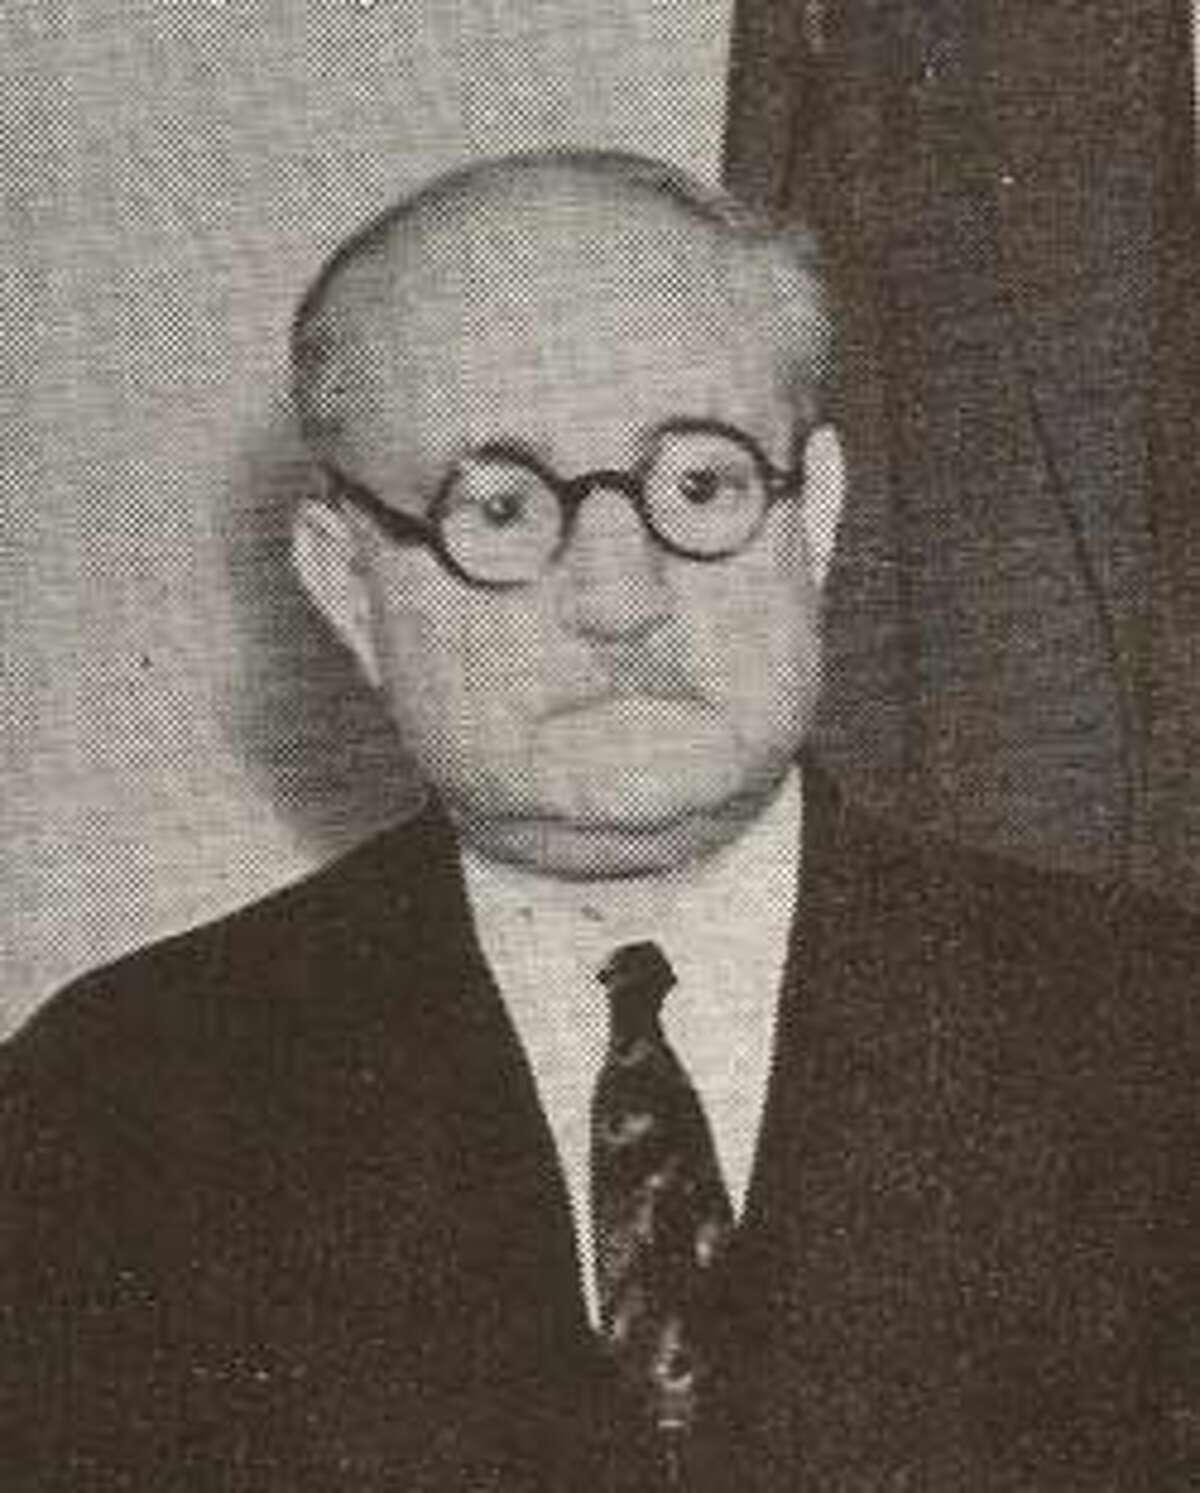 Musica at the time of his arrest in 1938.